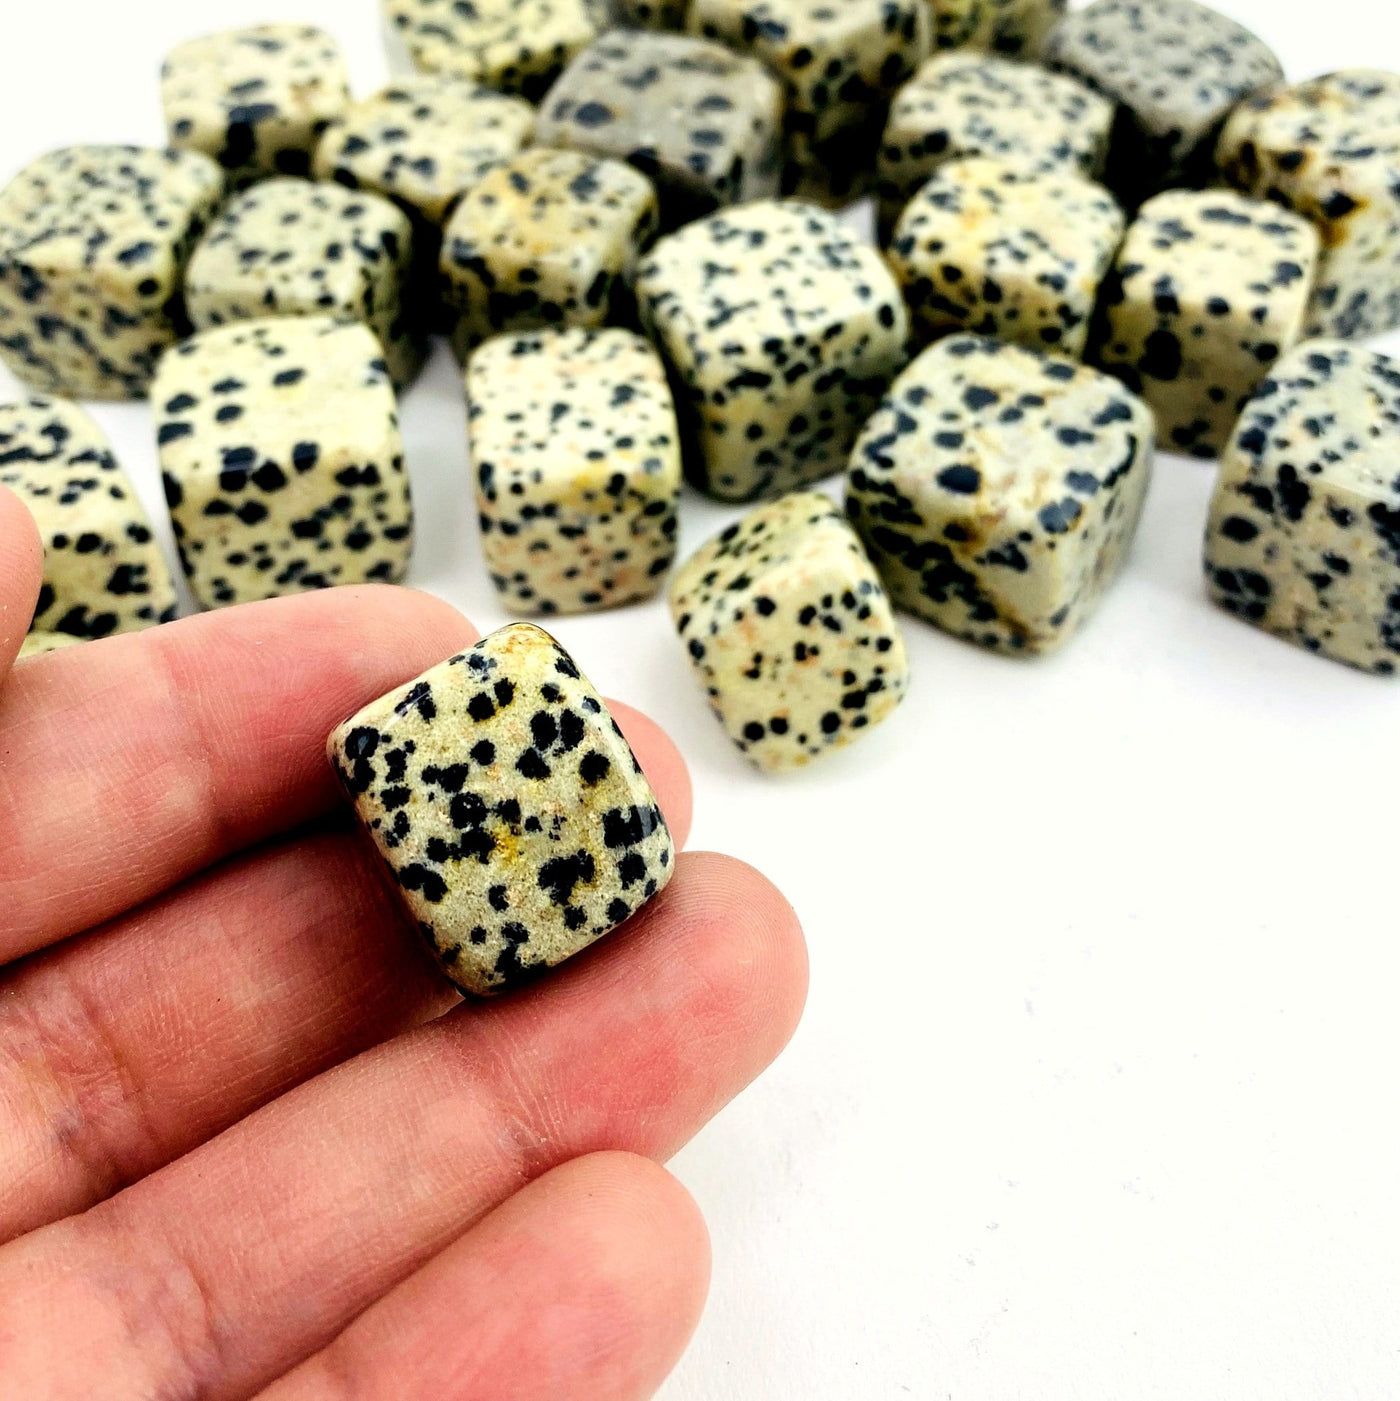 hand holding up dalmatian asper cube for size reference with others blurred in the background